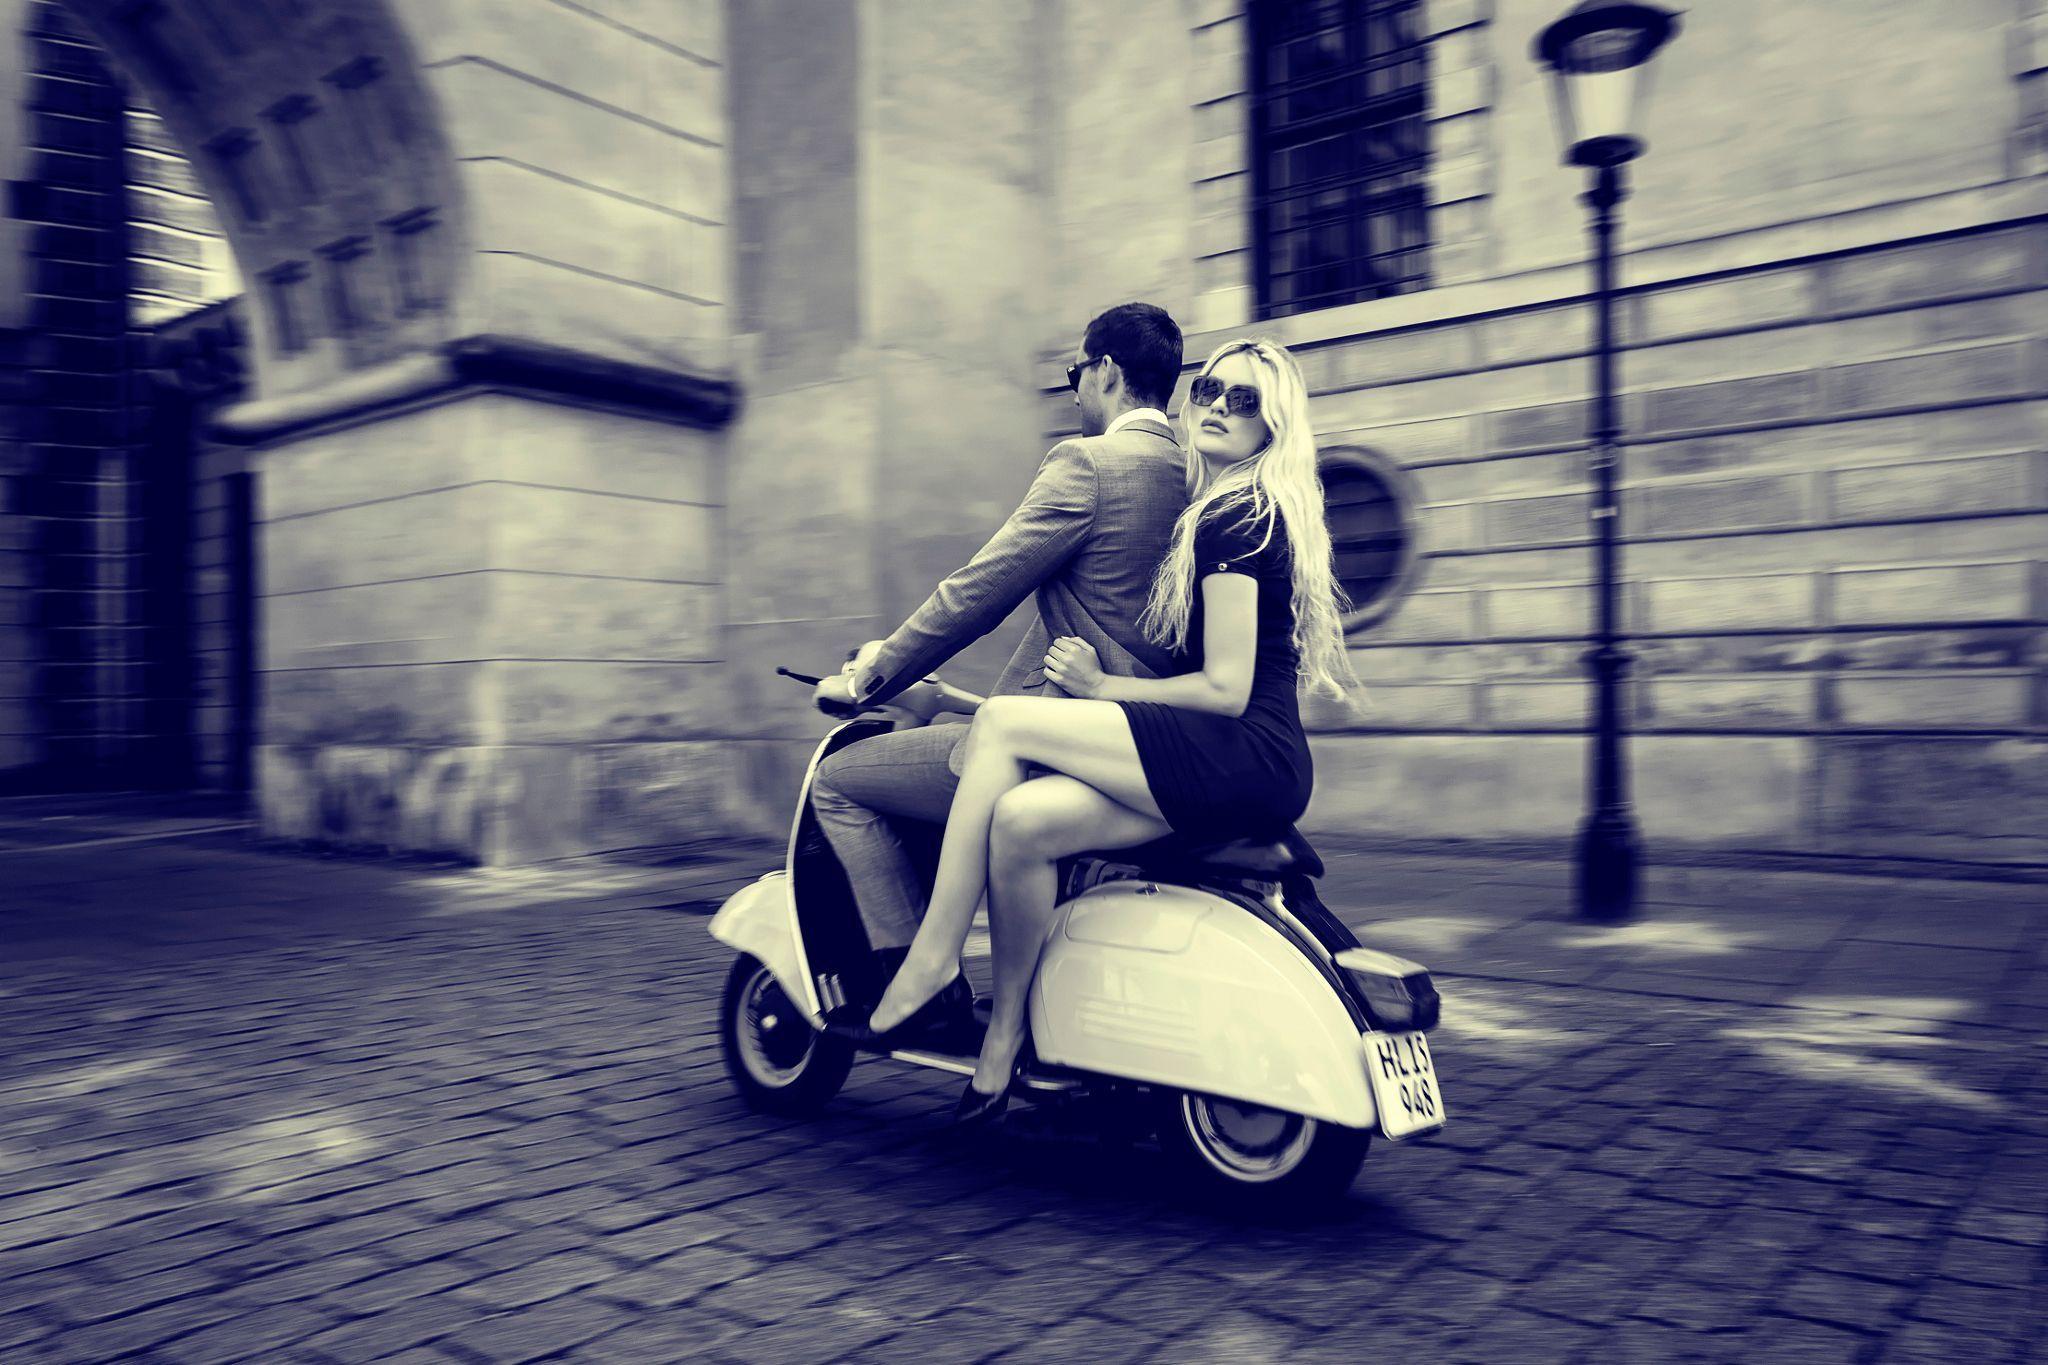 vespa HD wallpapers backgrounds